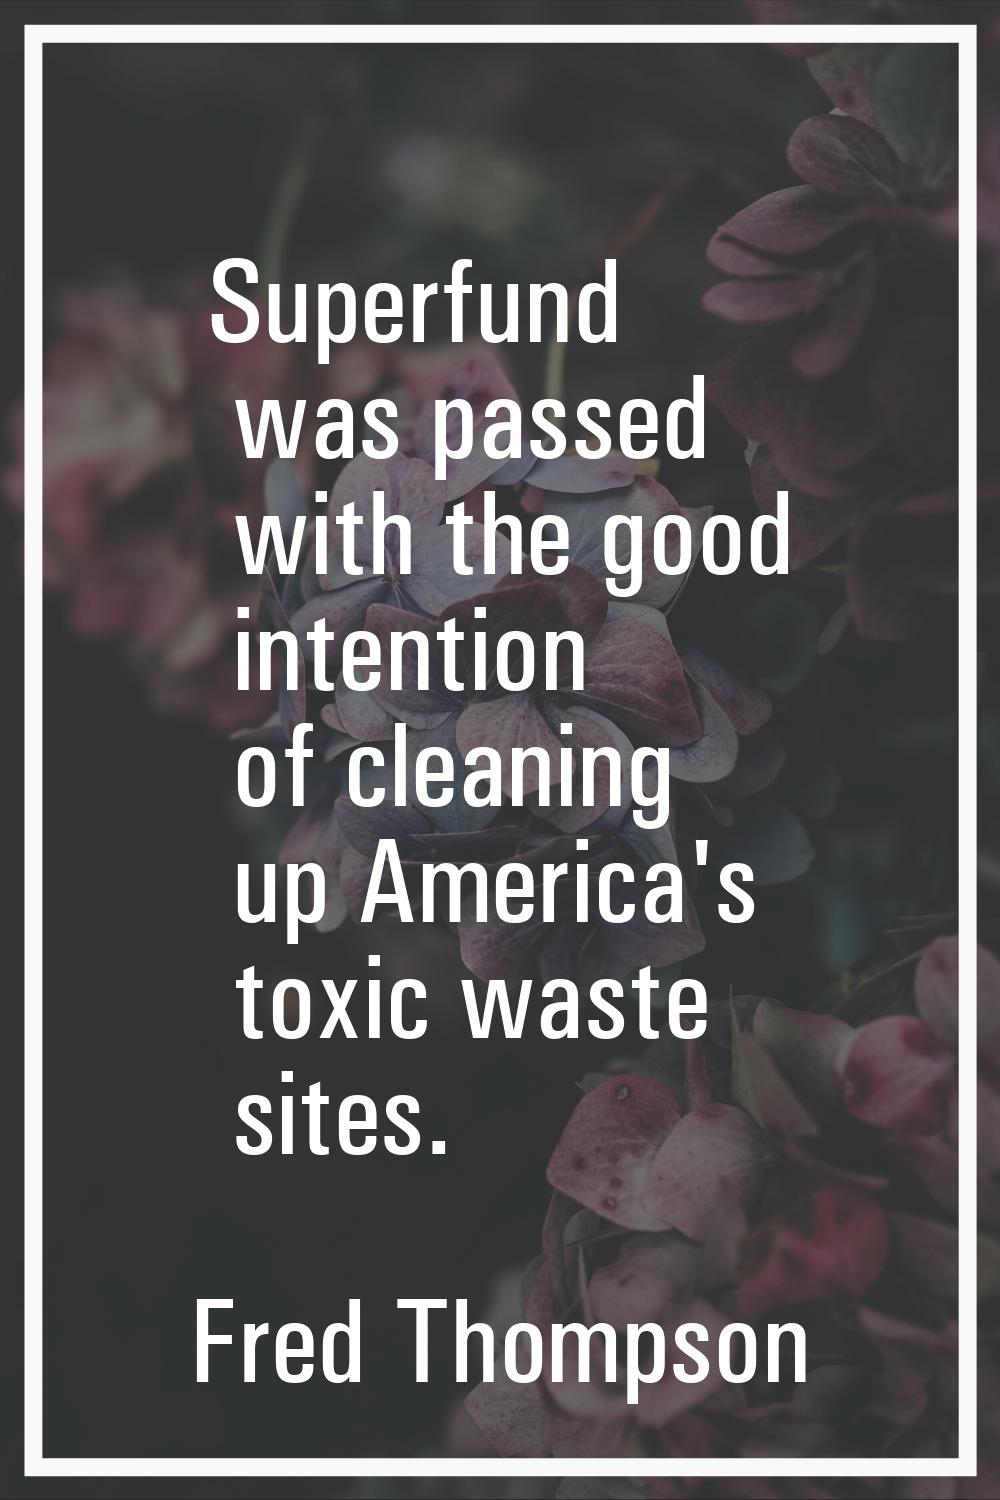 Superfund was passed with the good intention of cleaning up America's toxic waste sites.